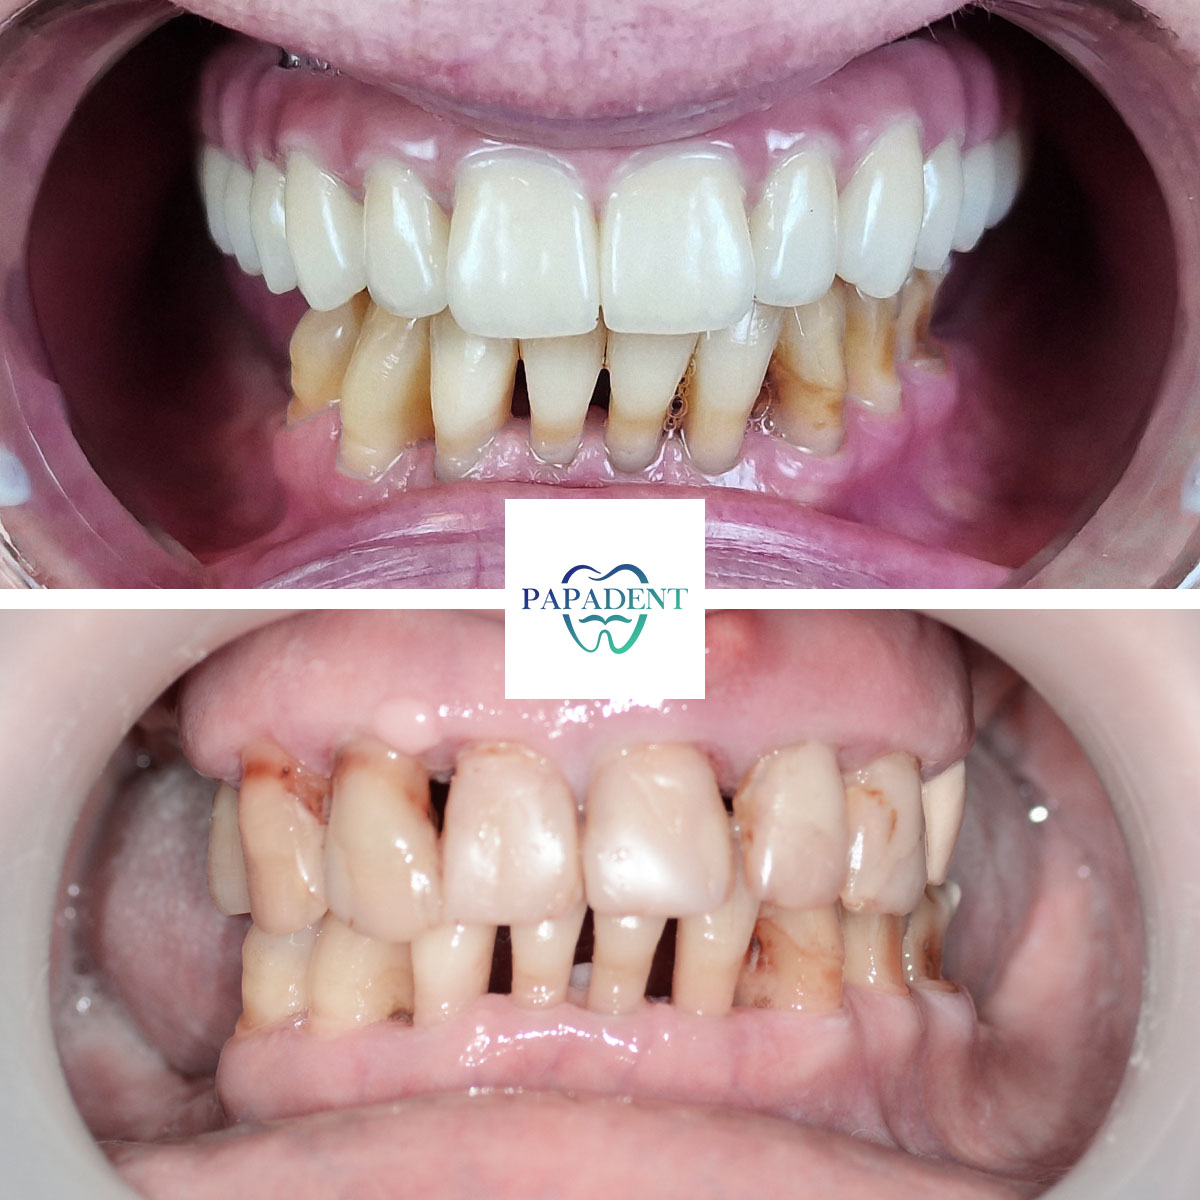 Laima - All-on-4 dentures - before and after 1